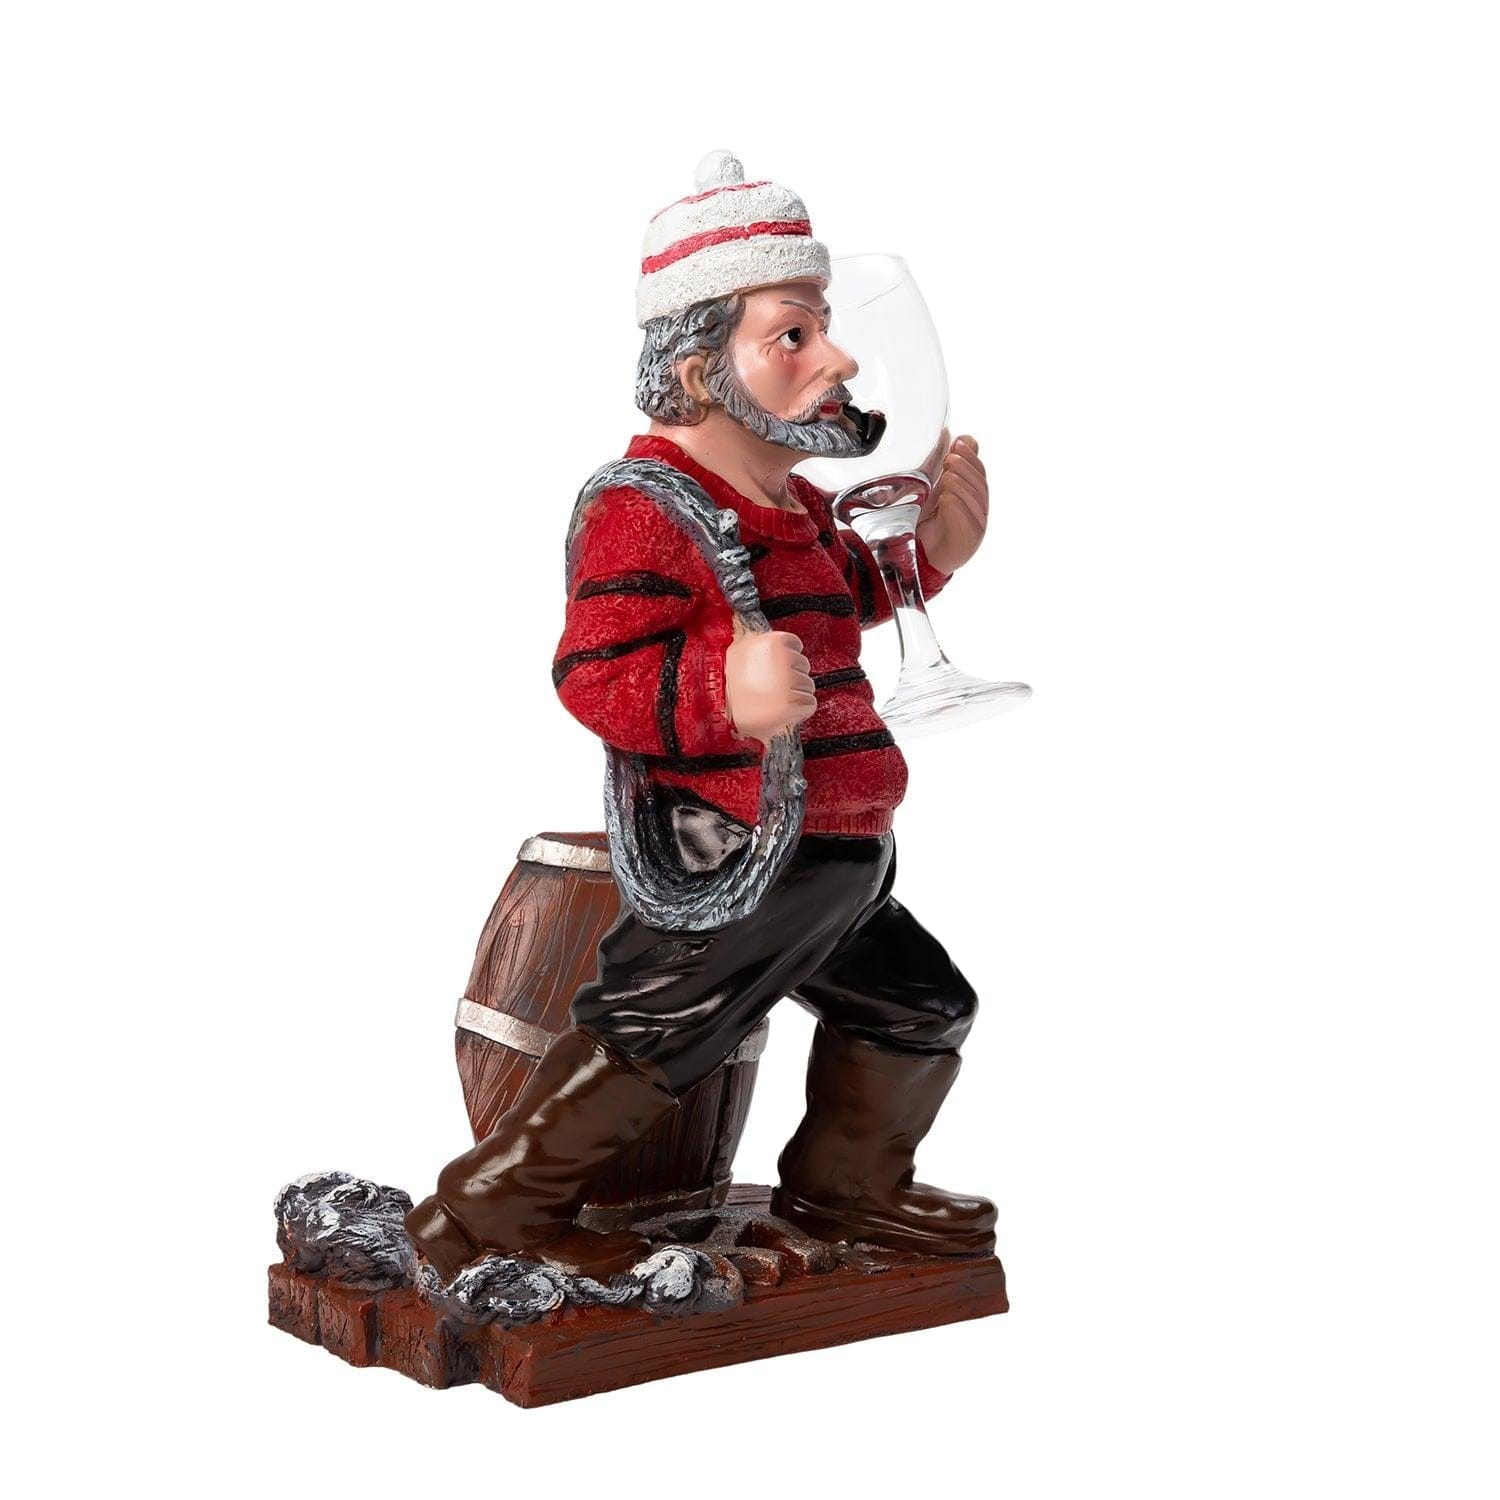 Nautical Winter Sailor Figurine Resin Bottle Holder with 1 Wine Glass Set (Red Shirt)